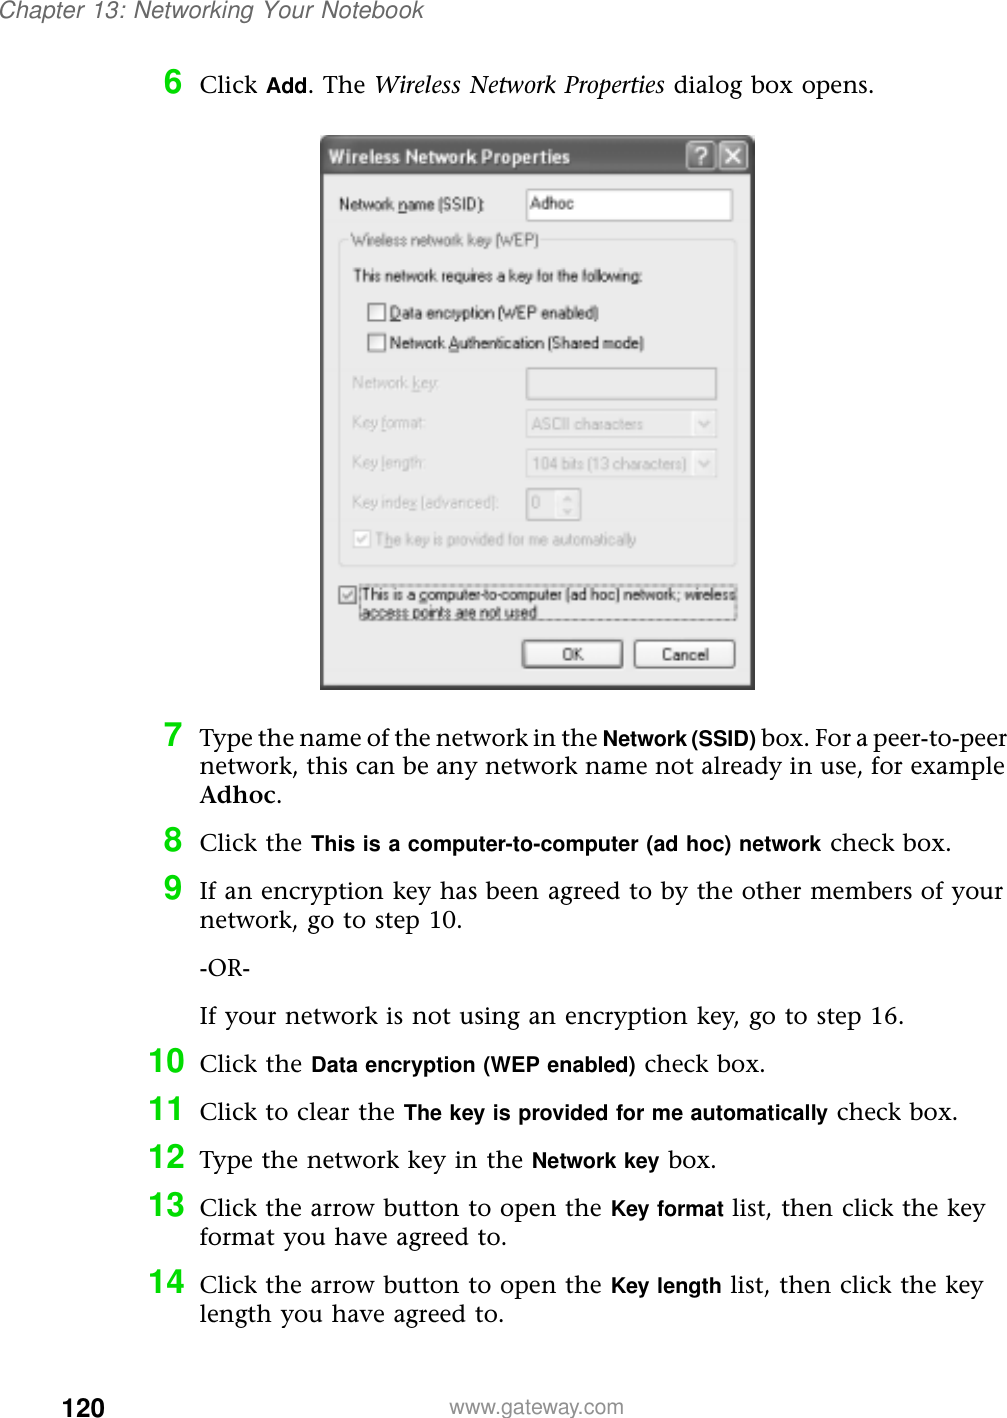 120Chapter 13: Networking Your Notebookwww.gateway.com6Click Add. The Wireless Network Properties dialog box opens.7Type the name of the network in the Network (SSID) box. For a peer-to-peer network, this can be any network name not already in use, for example Adhoc.8Click the This is a computer-to-computer (ad hoc) network check box.9If an encryption key has been agreed to by the other members of your network, go to step 10.-OR-If your network is not using an encryption key, go to step 16.10 Click the Data encryption (WEP enabled) check box.11 Click to clear the The key is provided for me automatically check box.12 Type the network key in the Network key box.13 Click the arrow button to open the Key format list, then click the key format you have agreed to.14 Click the arrow button to open the Key length list, then click the key length you have agreed to.